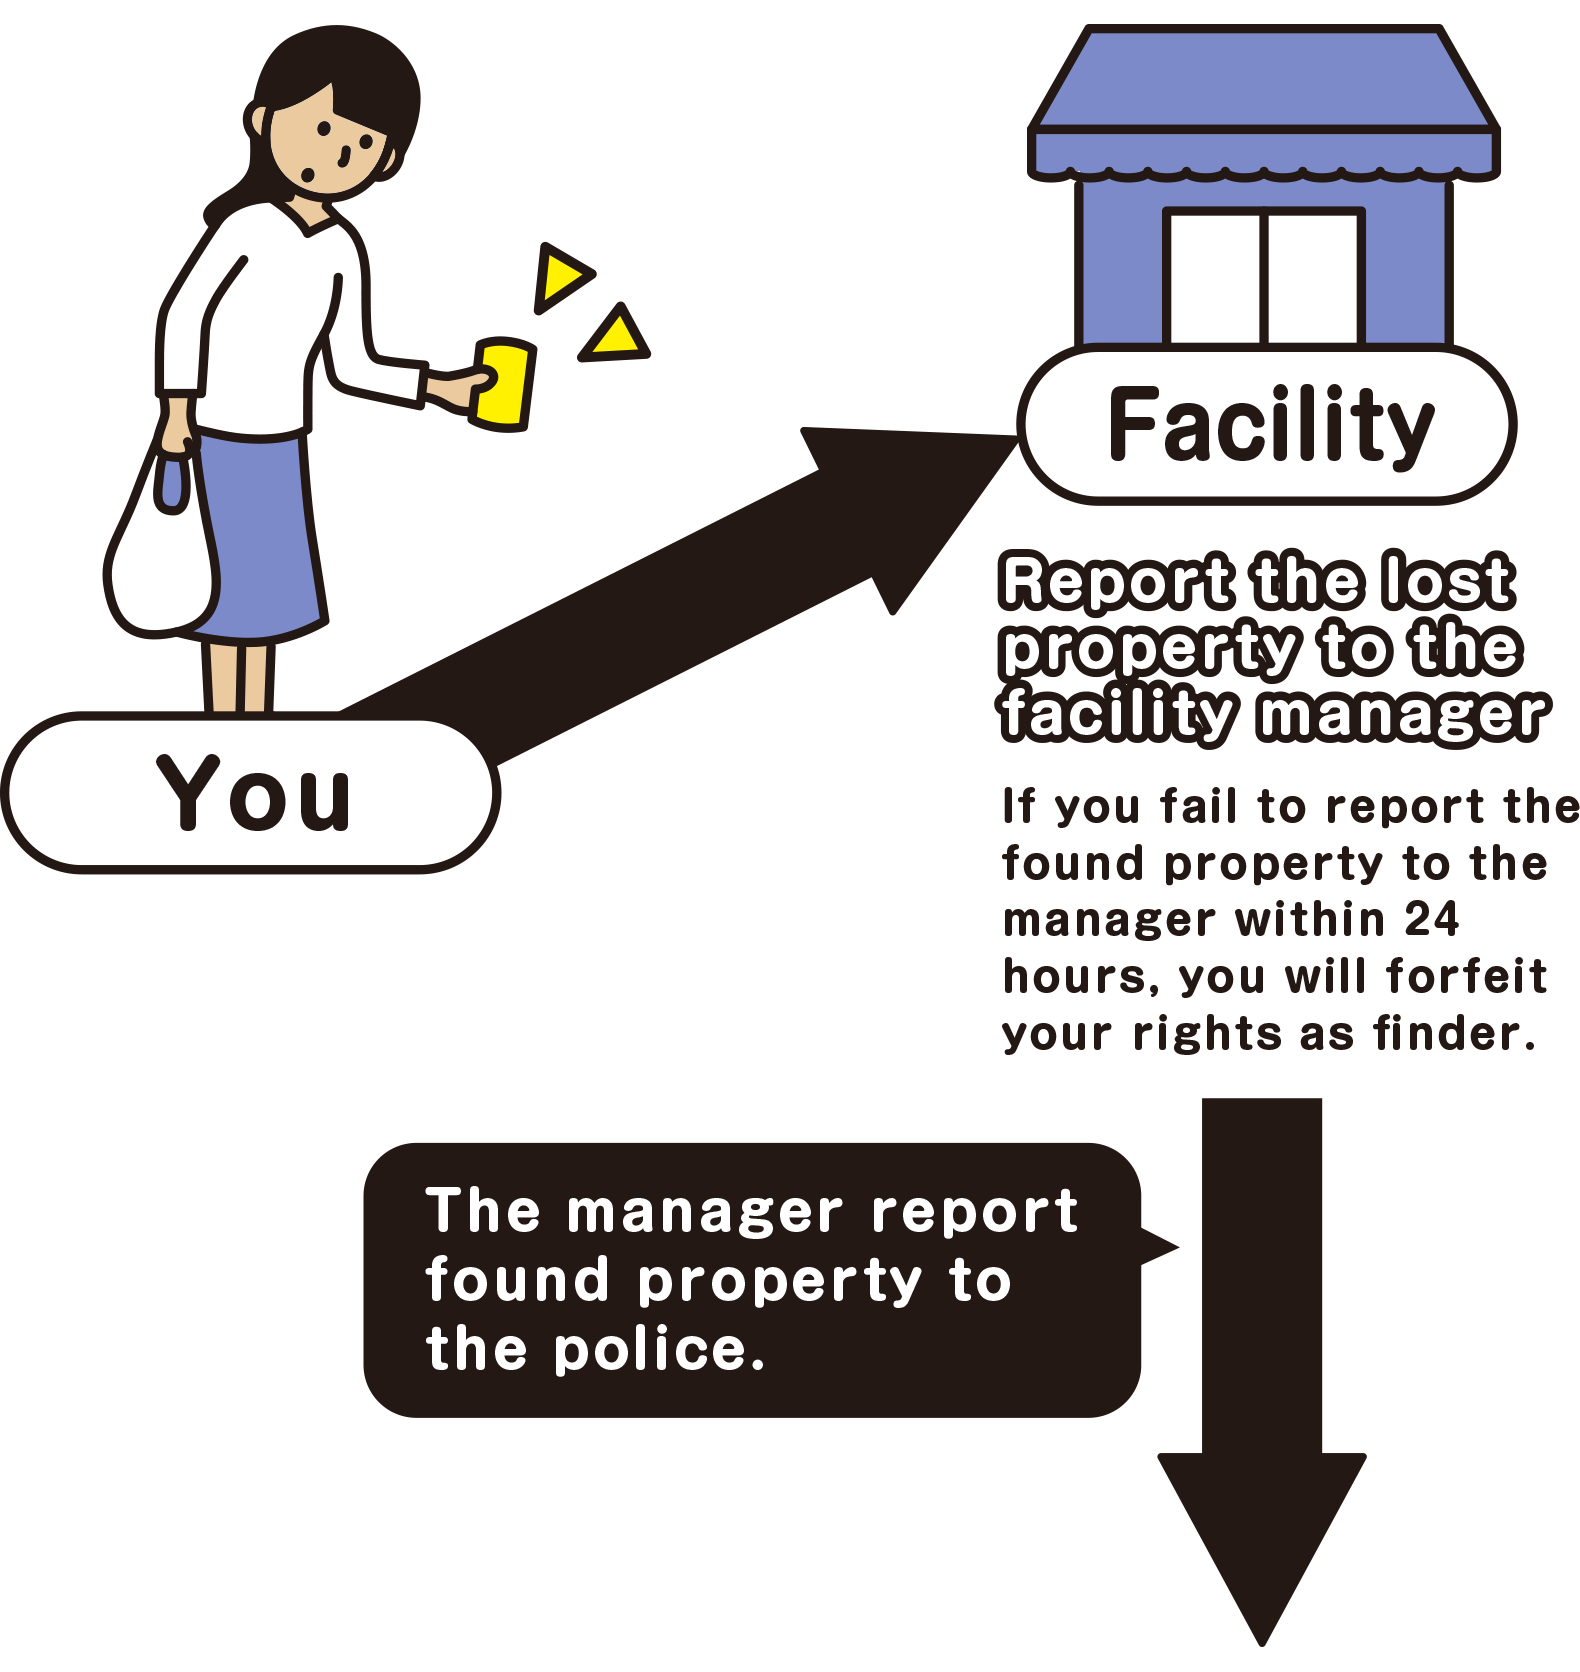 If you fail to report the found property to the manager within 24 hours, you will forfeit your rights as finder.　The manager report the found property to the police